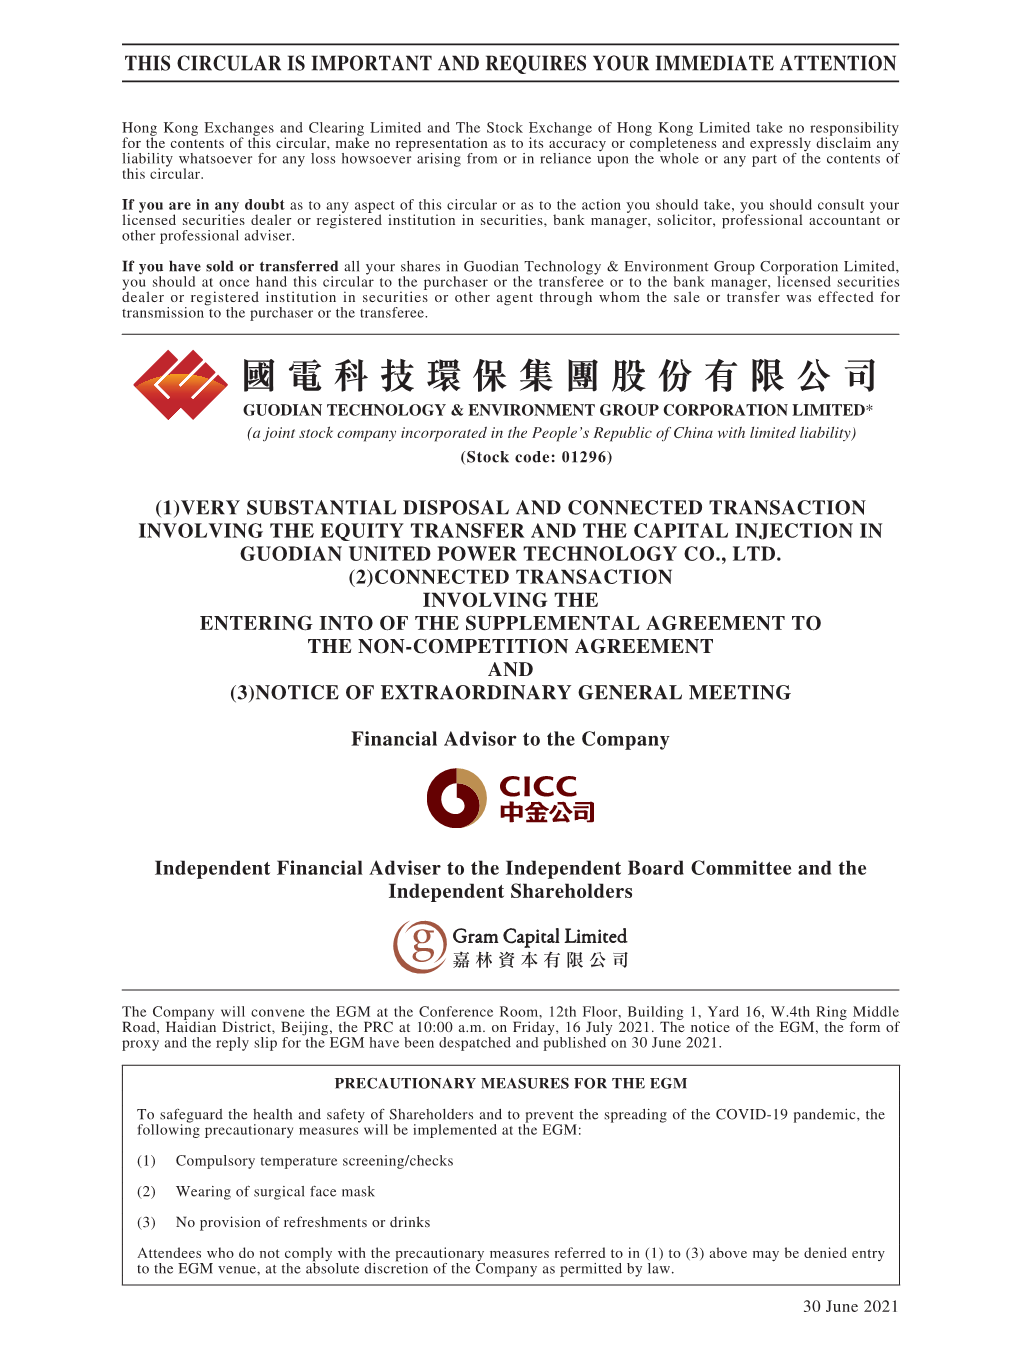 Very Substantial Disposal and Connected Transaction Involving the Equity Transfer and the Capital Injection in Guodian United Power Technology Co., Ltd